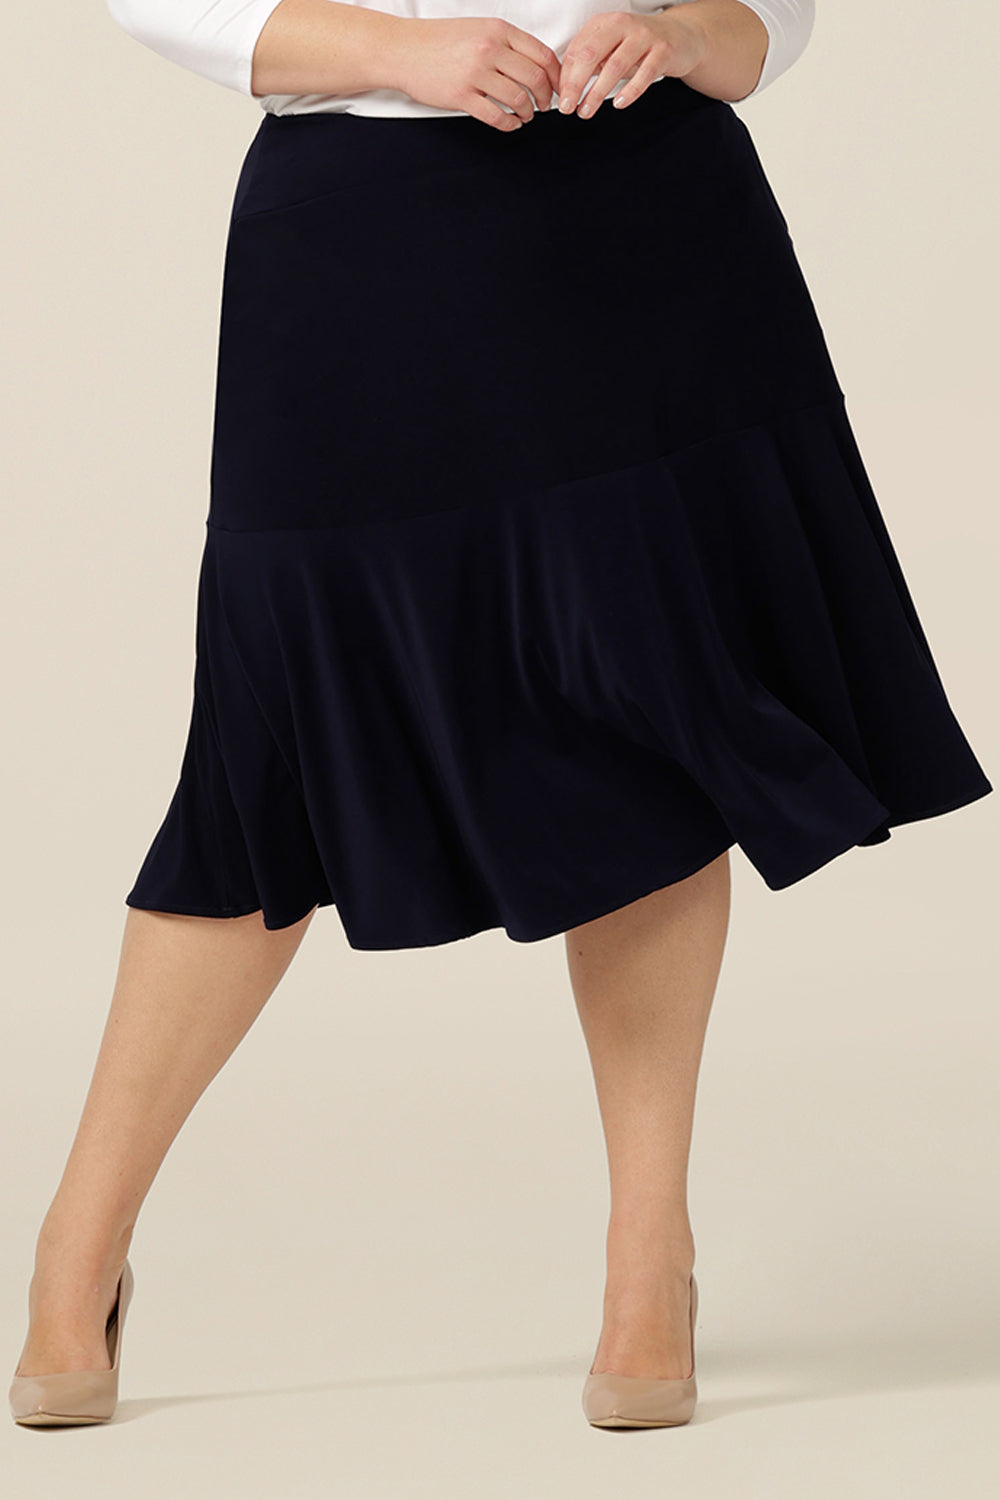 A navy blue, below-the-knee-length skirt with ruffle hemline. A pull-on skirt in stretch jersey fabric, this is a comfortable skirt for all-day work wear.